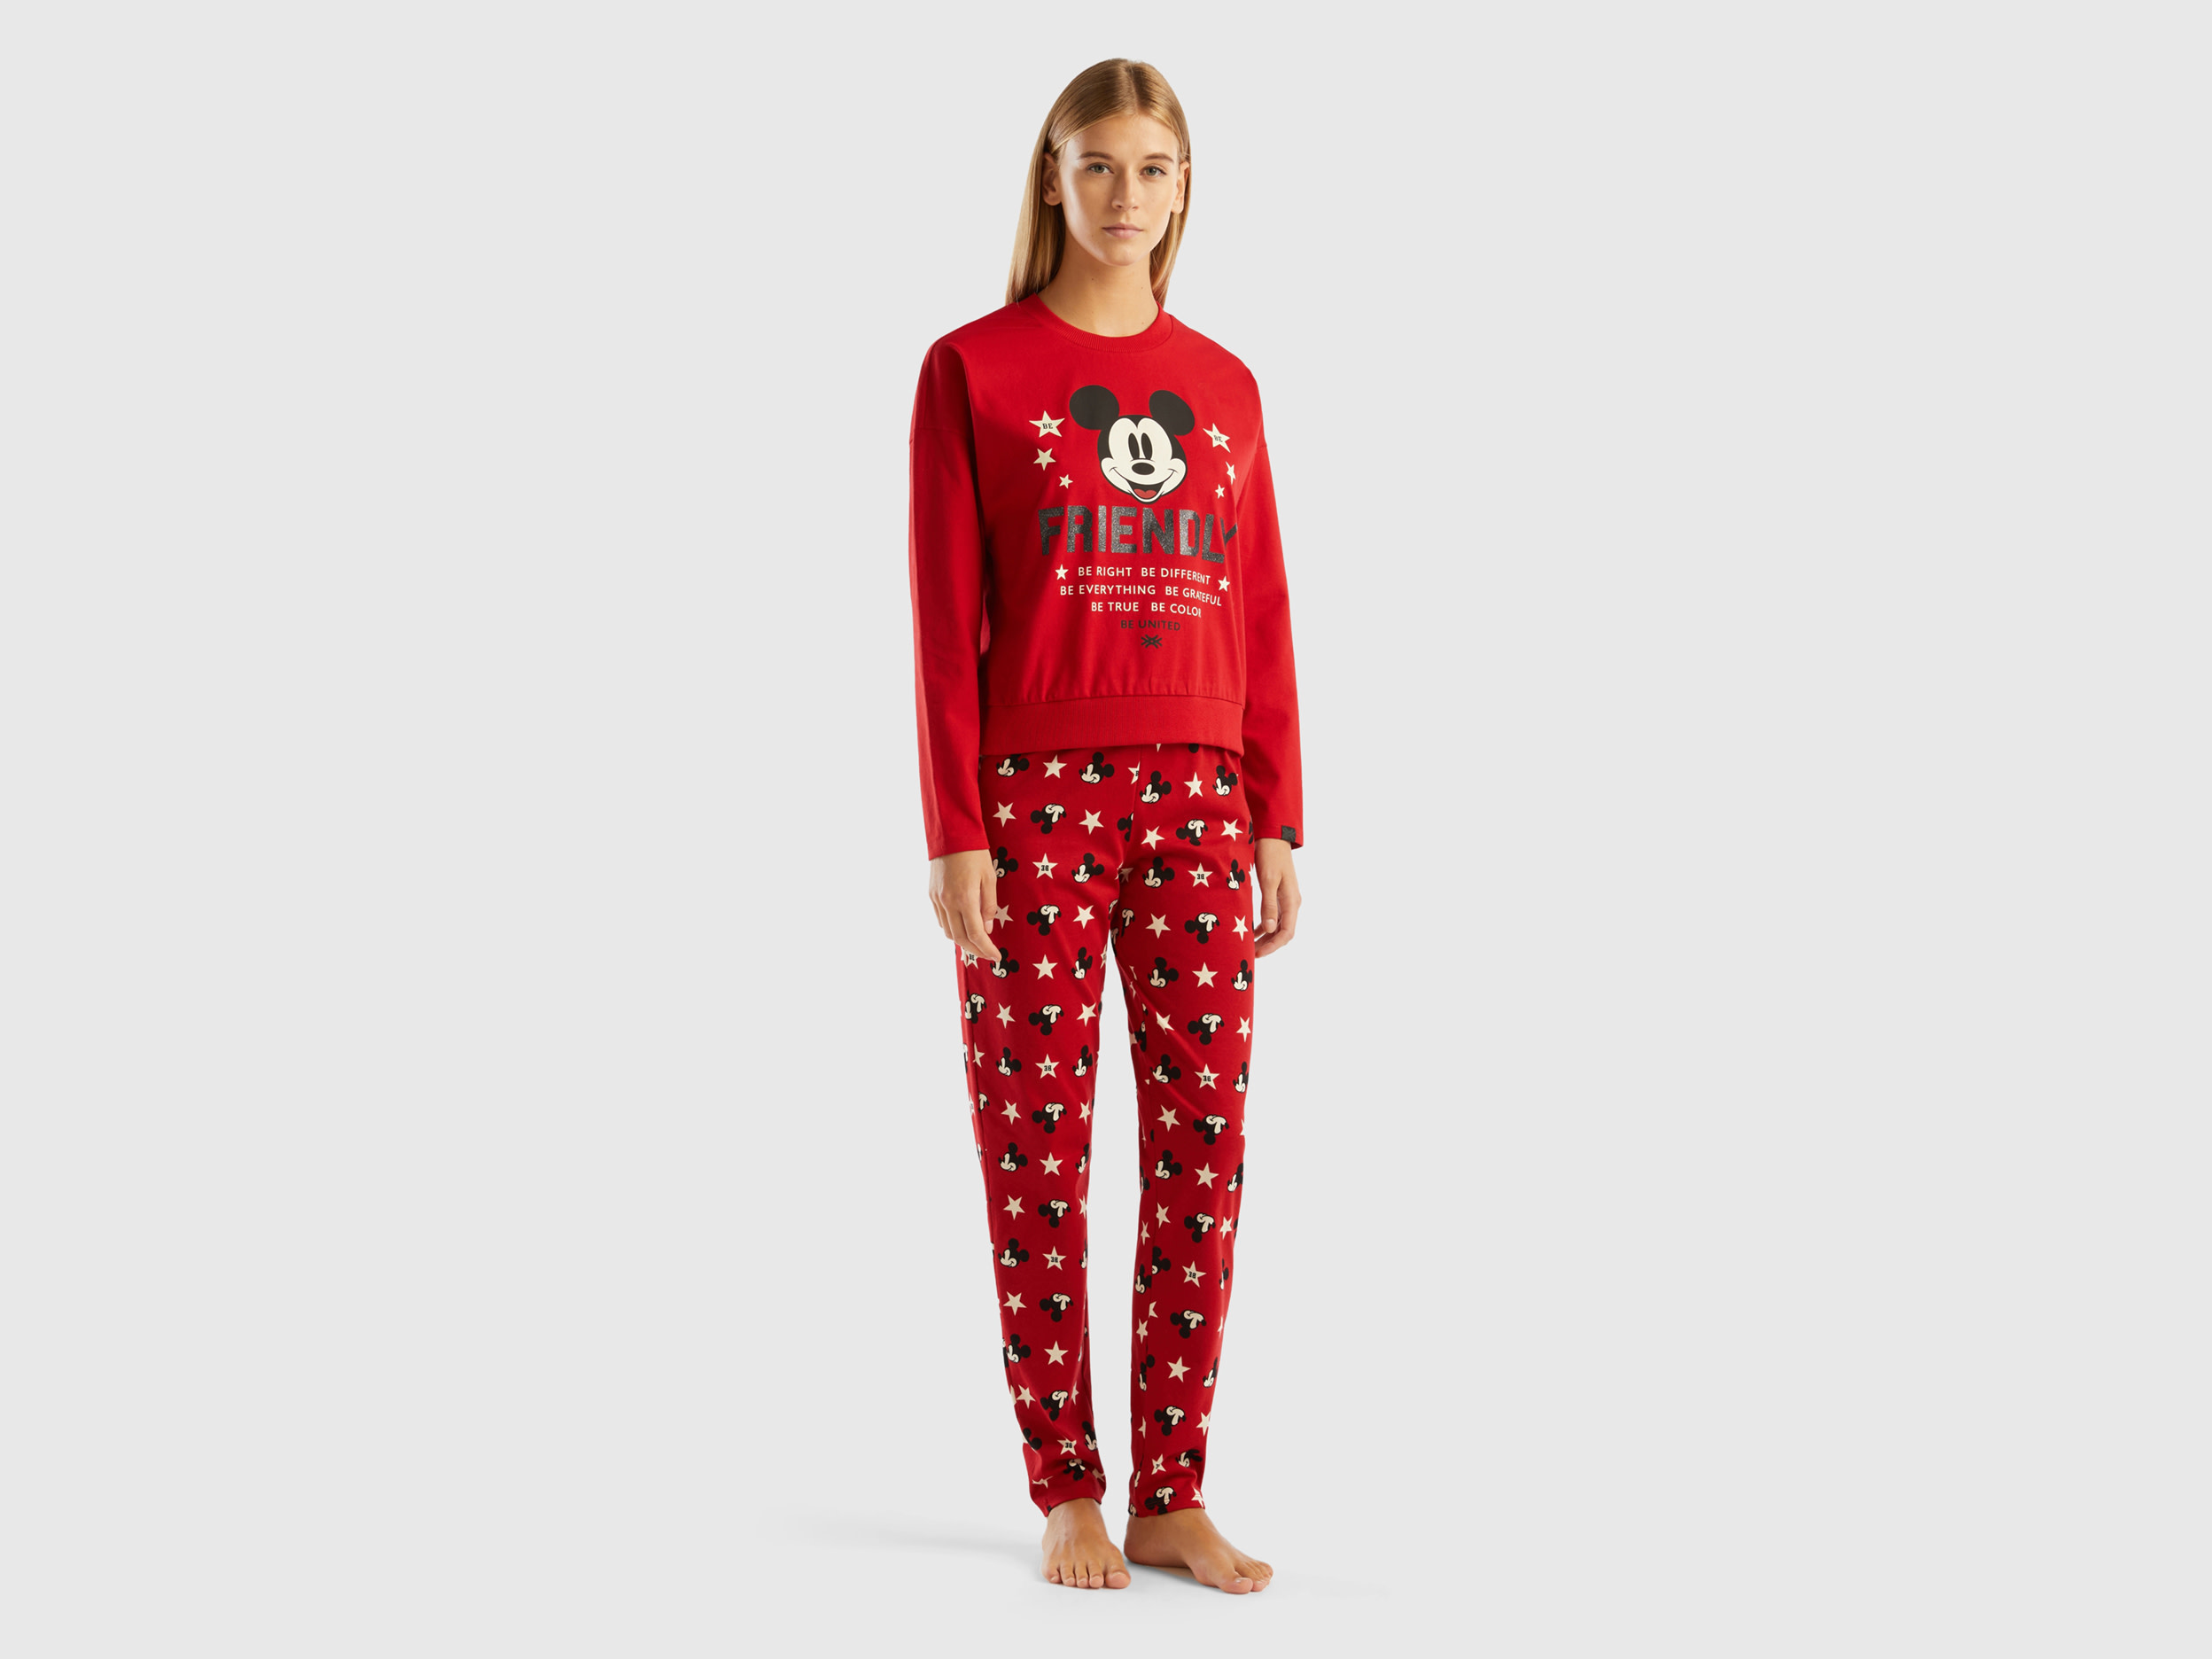 Benetton, Pyjamas With Neon Mickey Mouse Print, size M, Red, Women